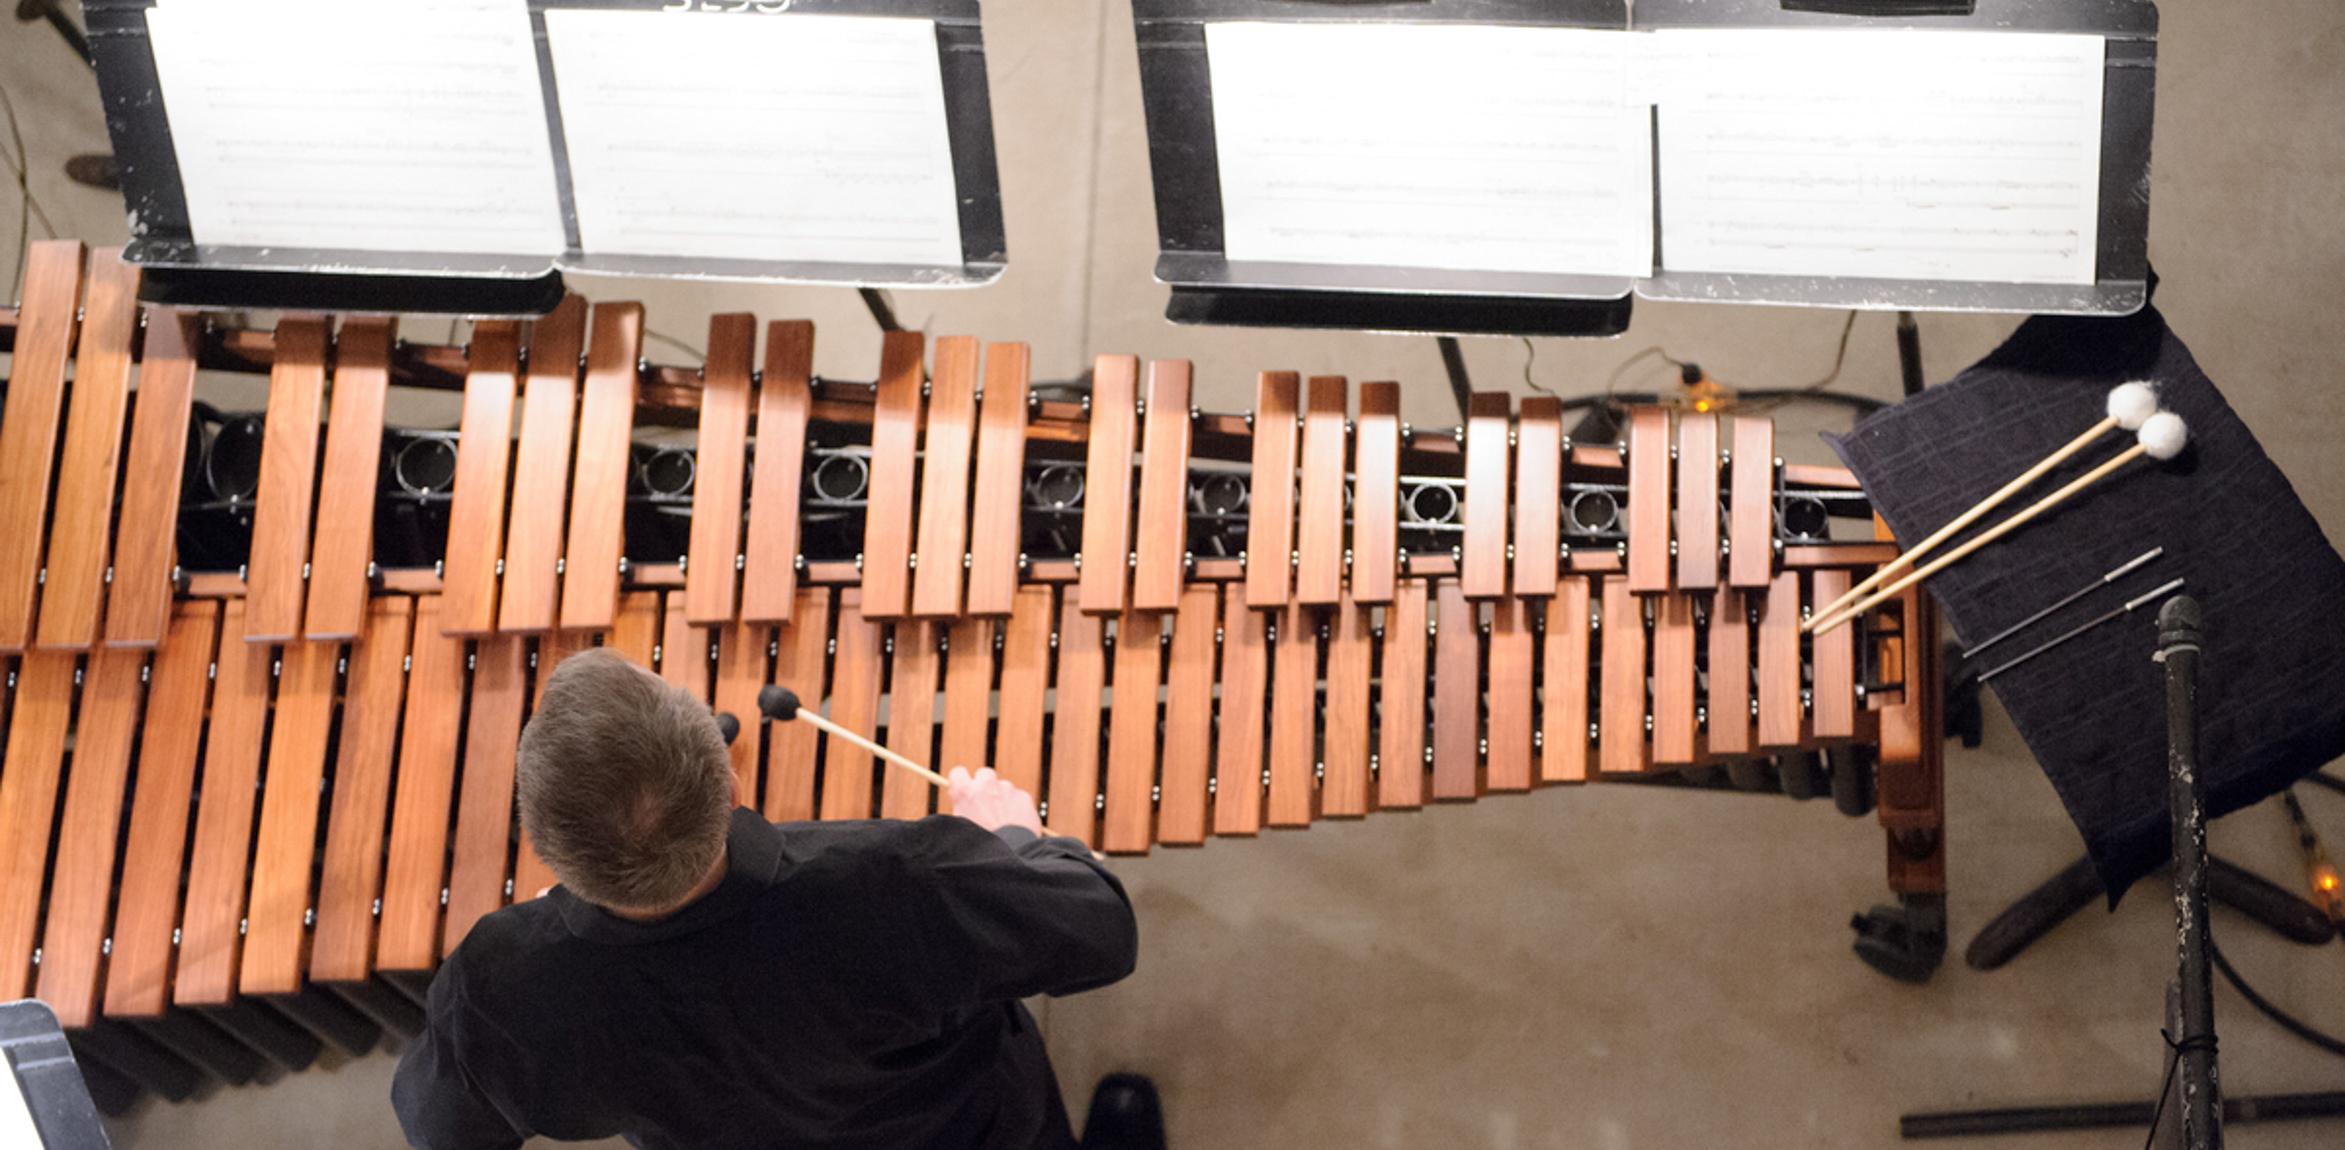 An aerial view of a glockenspiel player performing in the Lower Main Gallery.